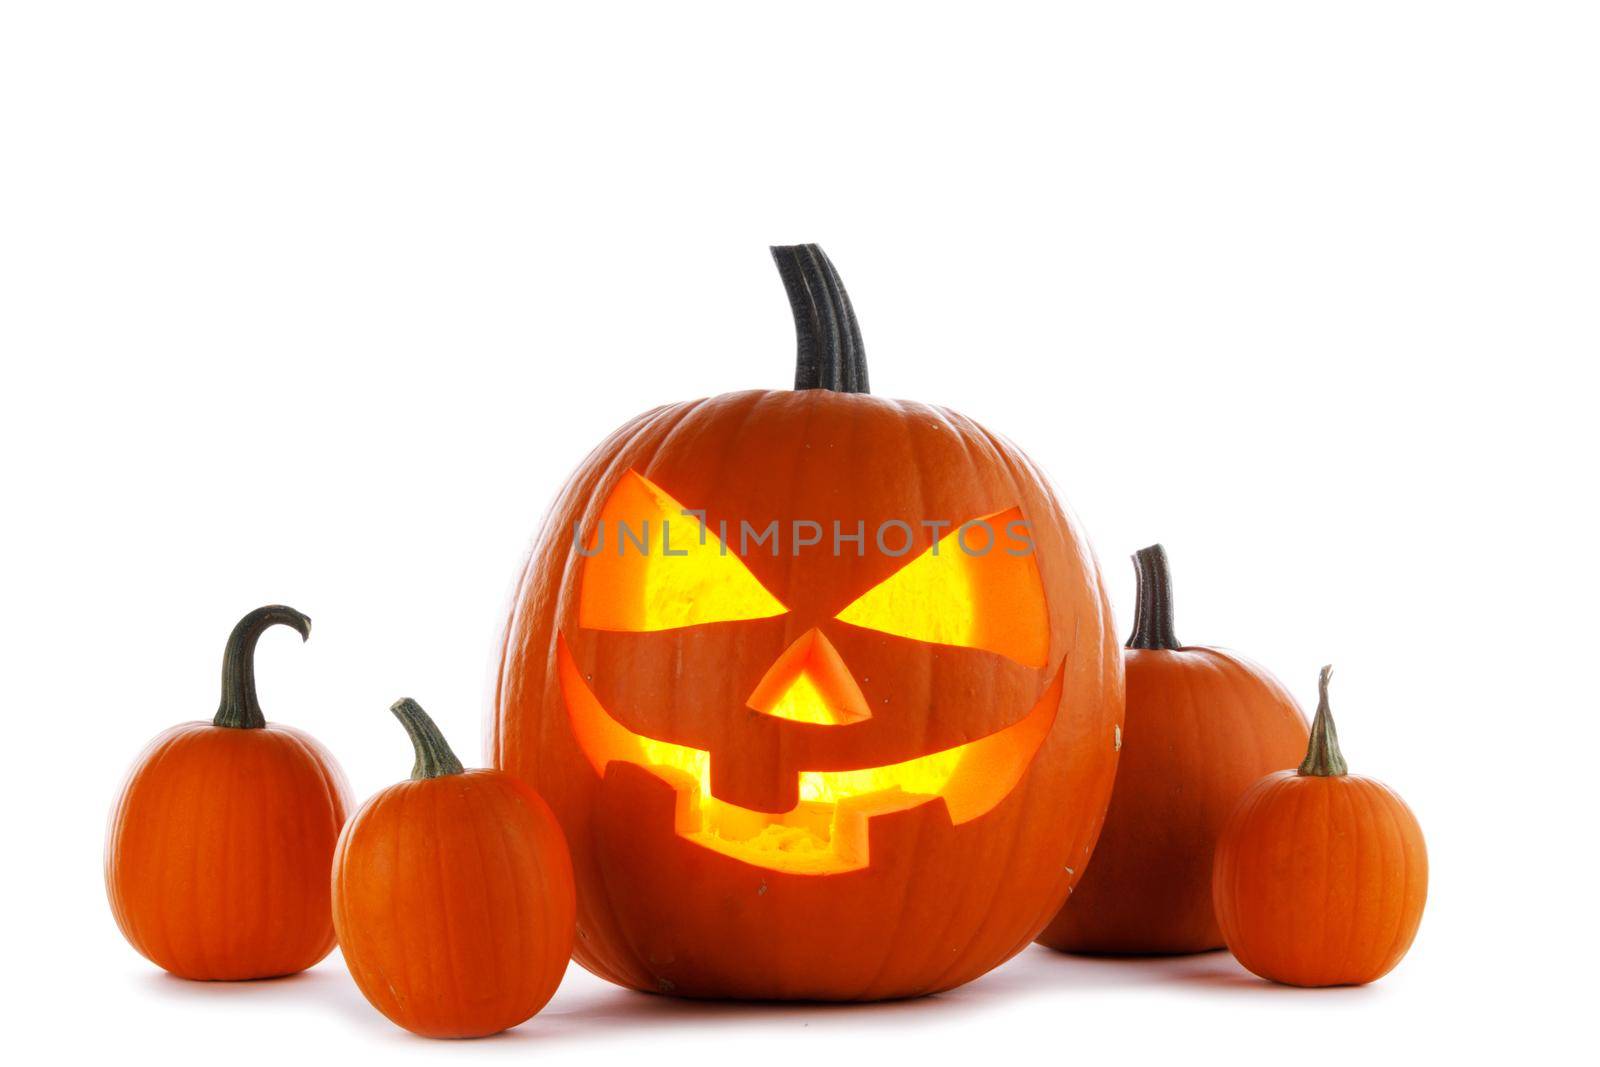 Halloween pumpkins isolated on white background, carved pumpkin with burning candle inside